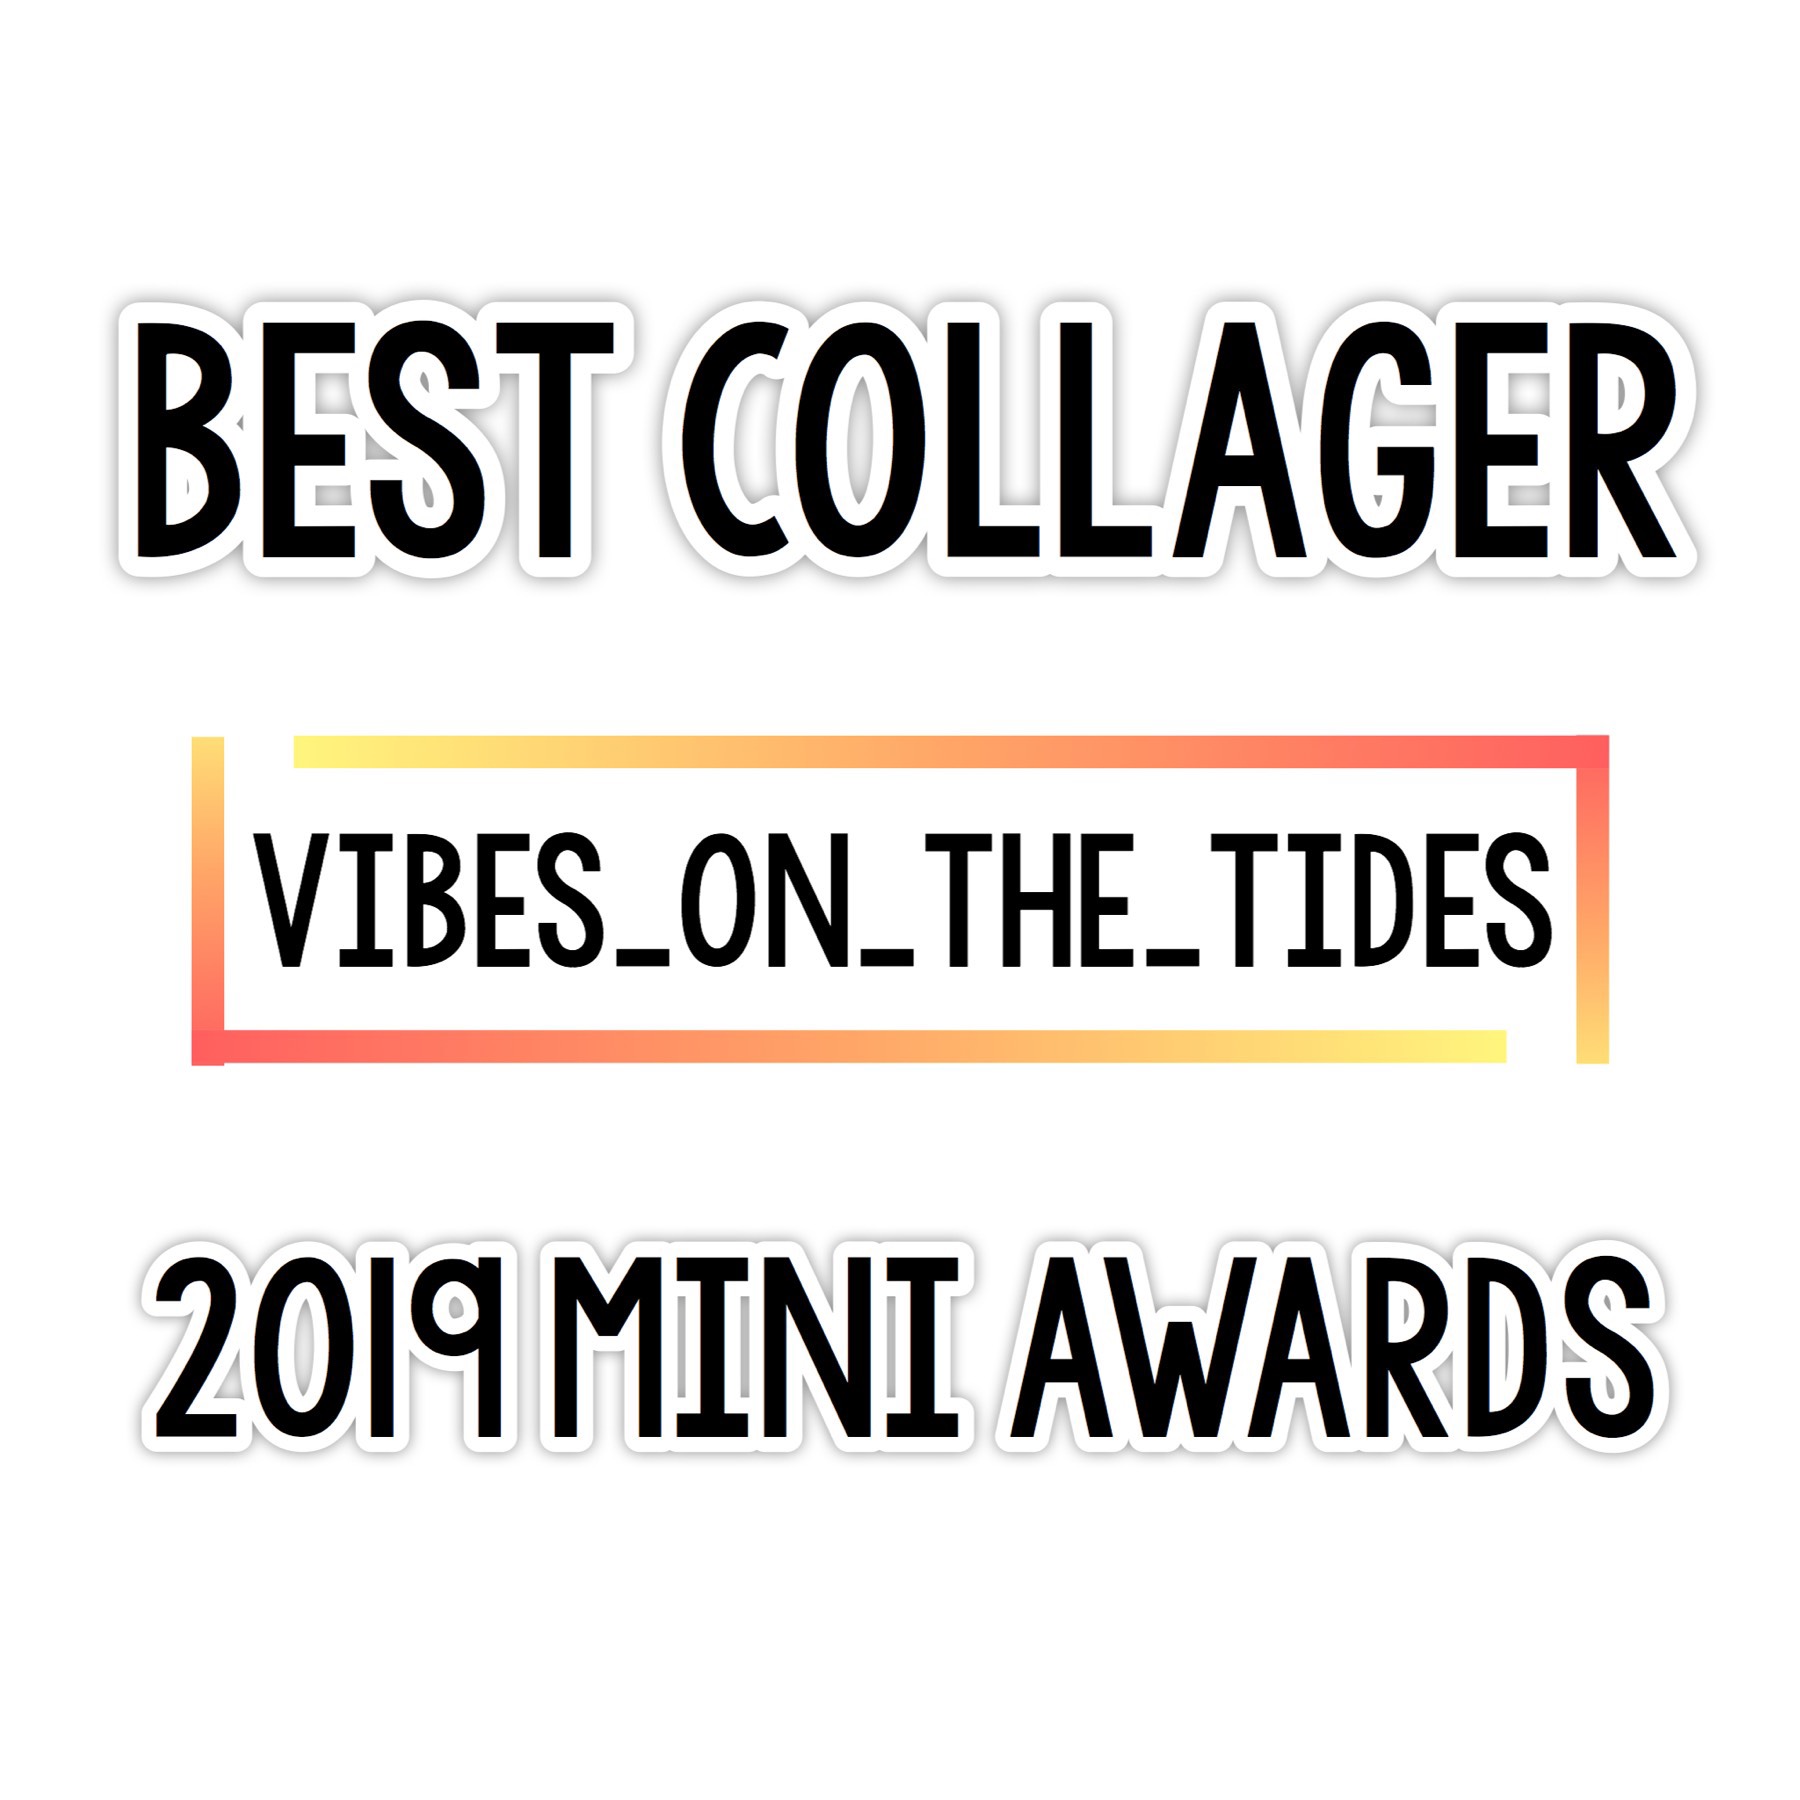 Congratulations vibe_on_the_tides !